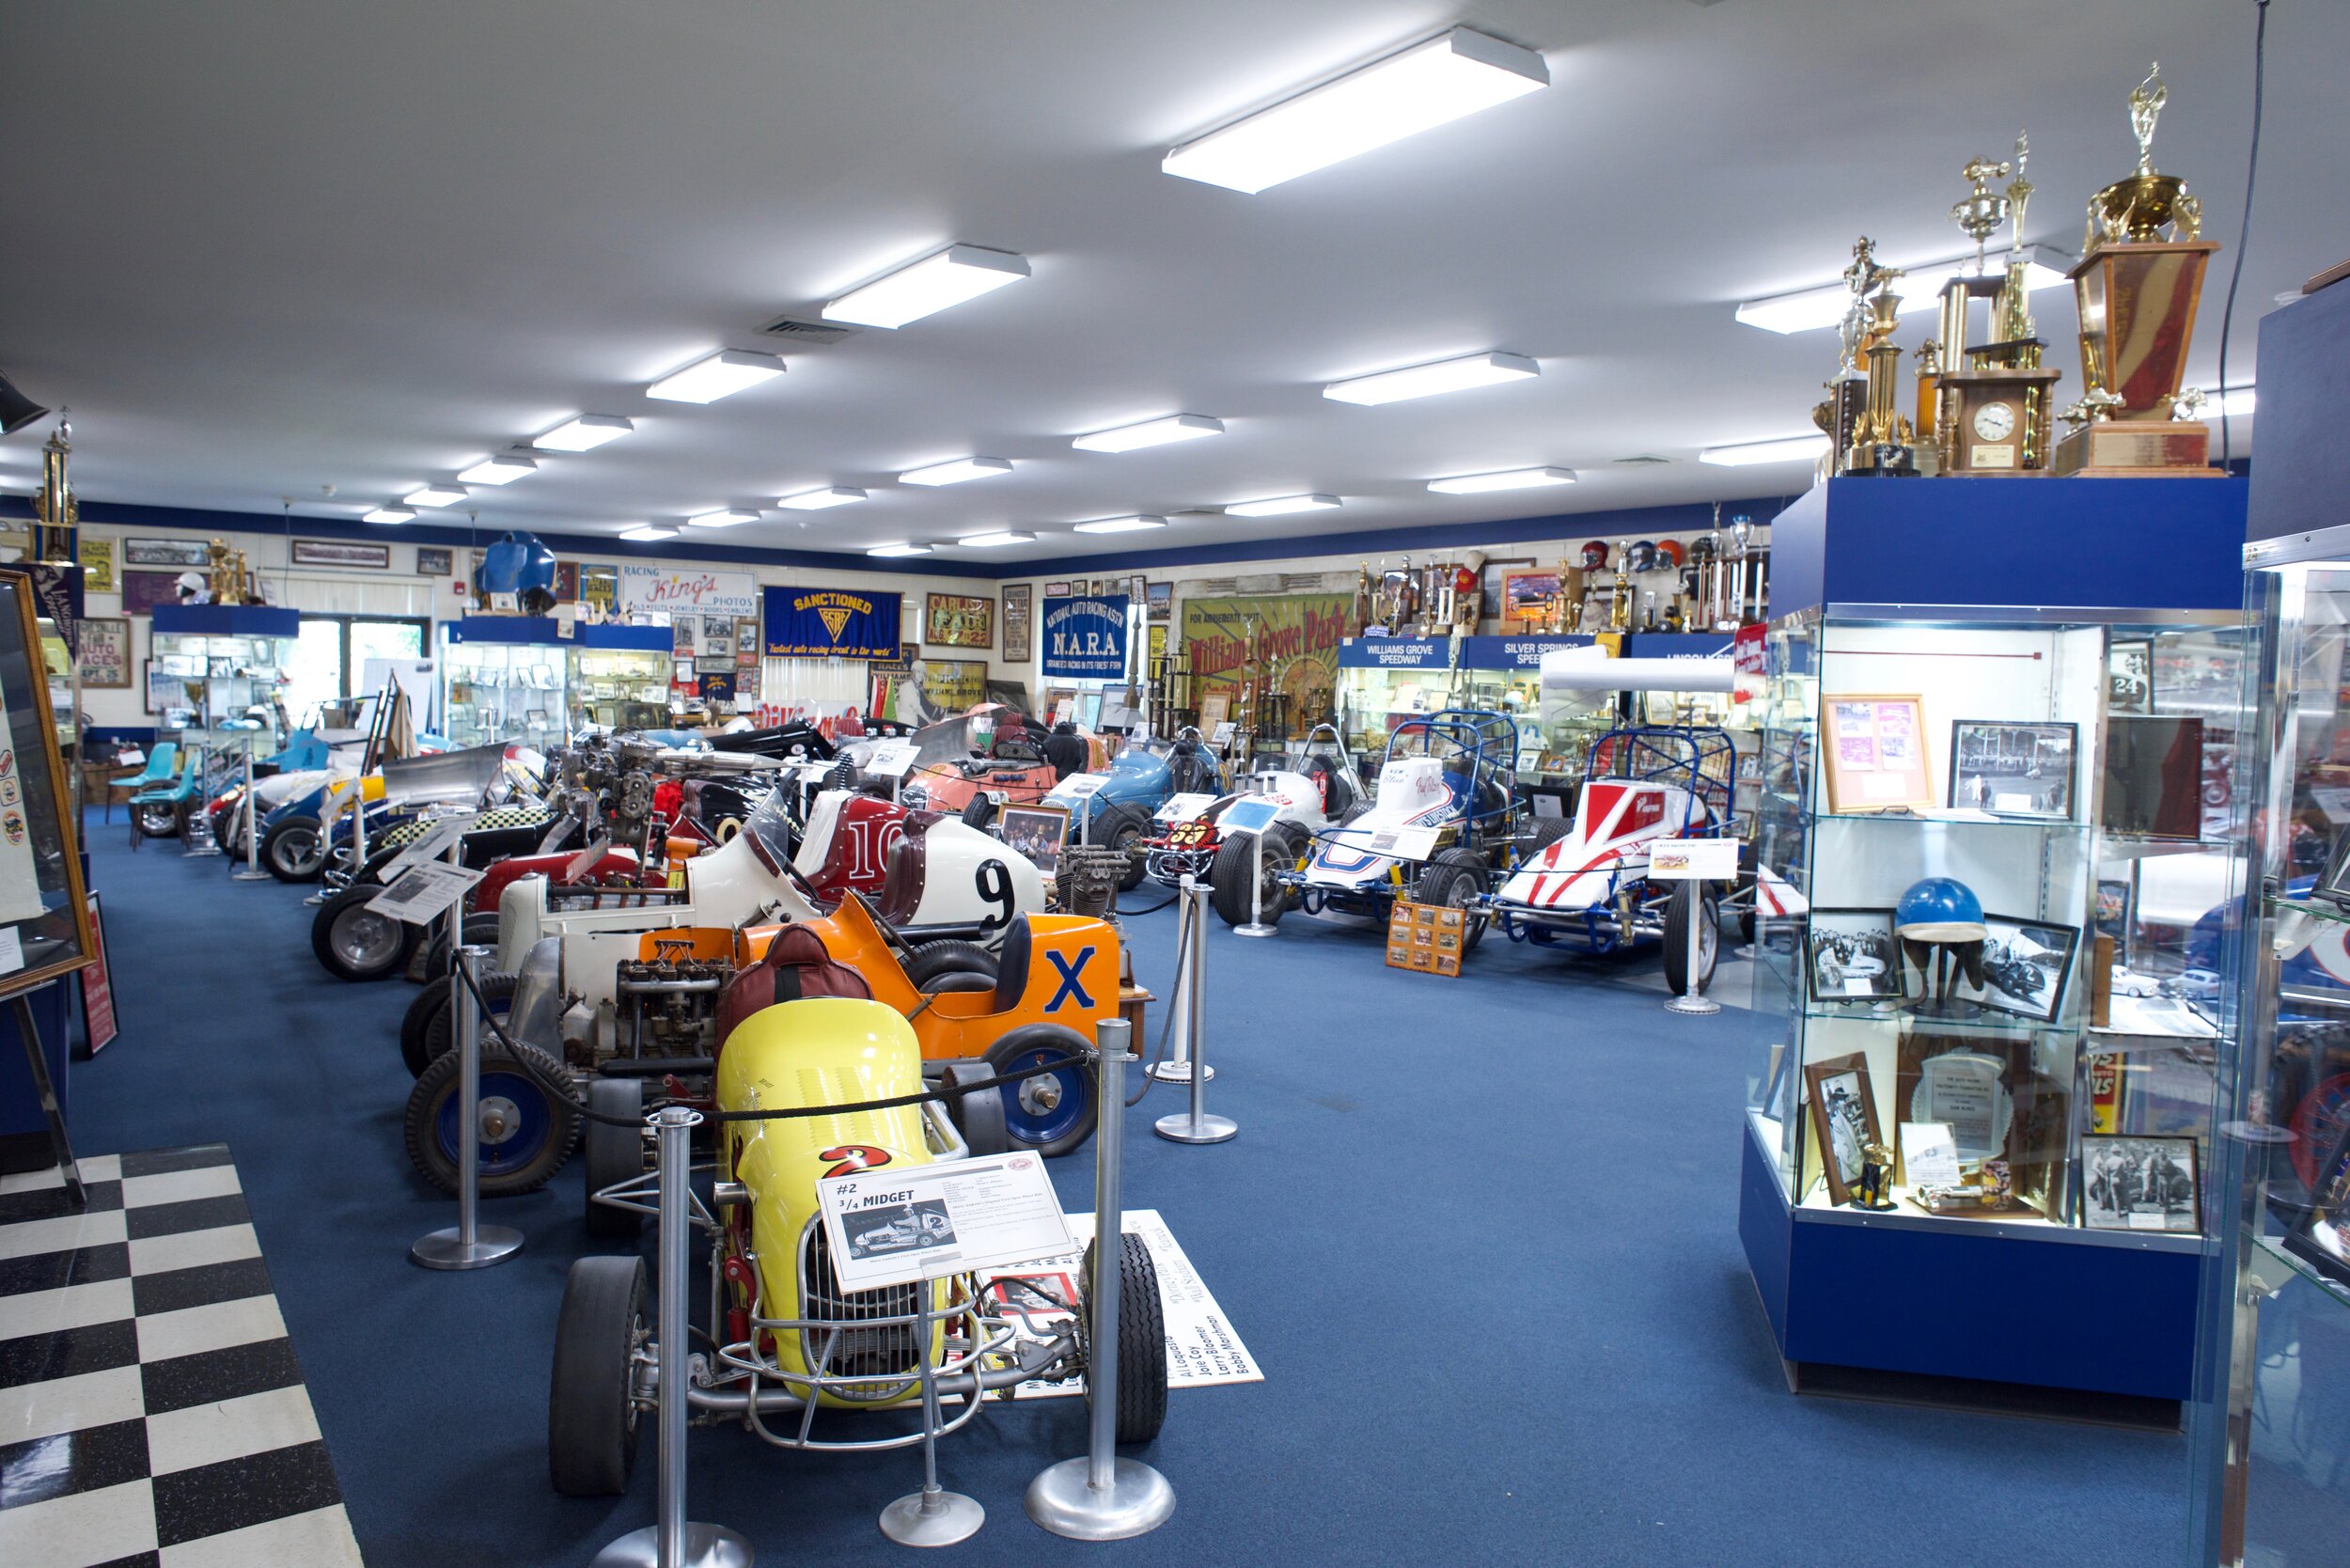  The main room at the museum is packed with race cars and displays of gear and memorabilia. 